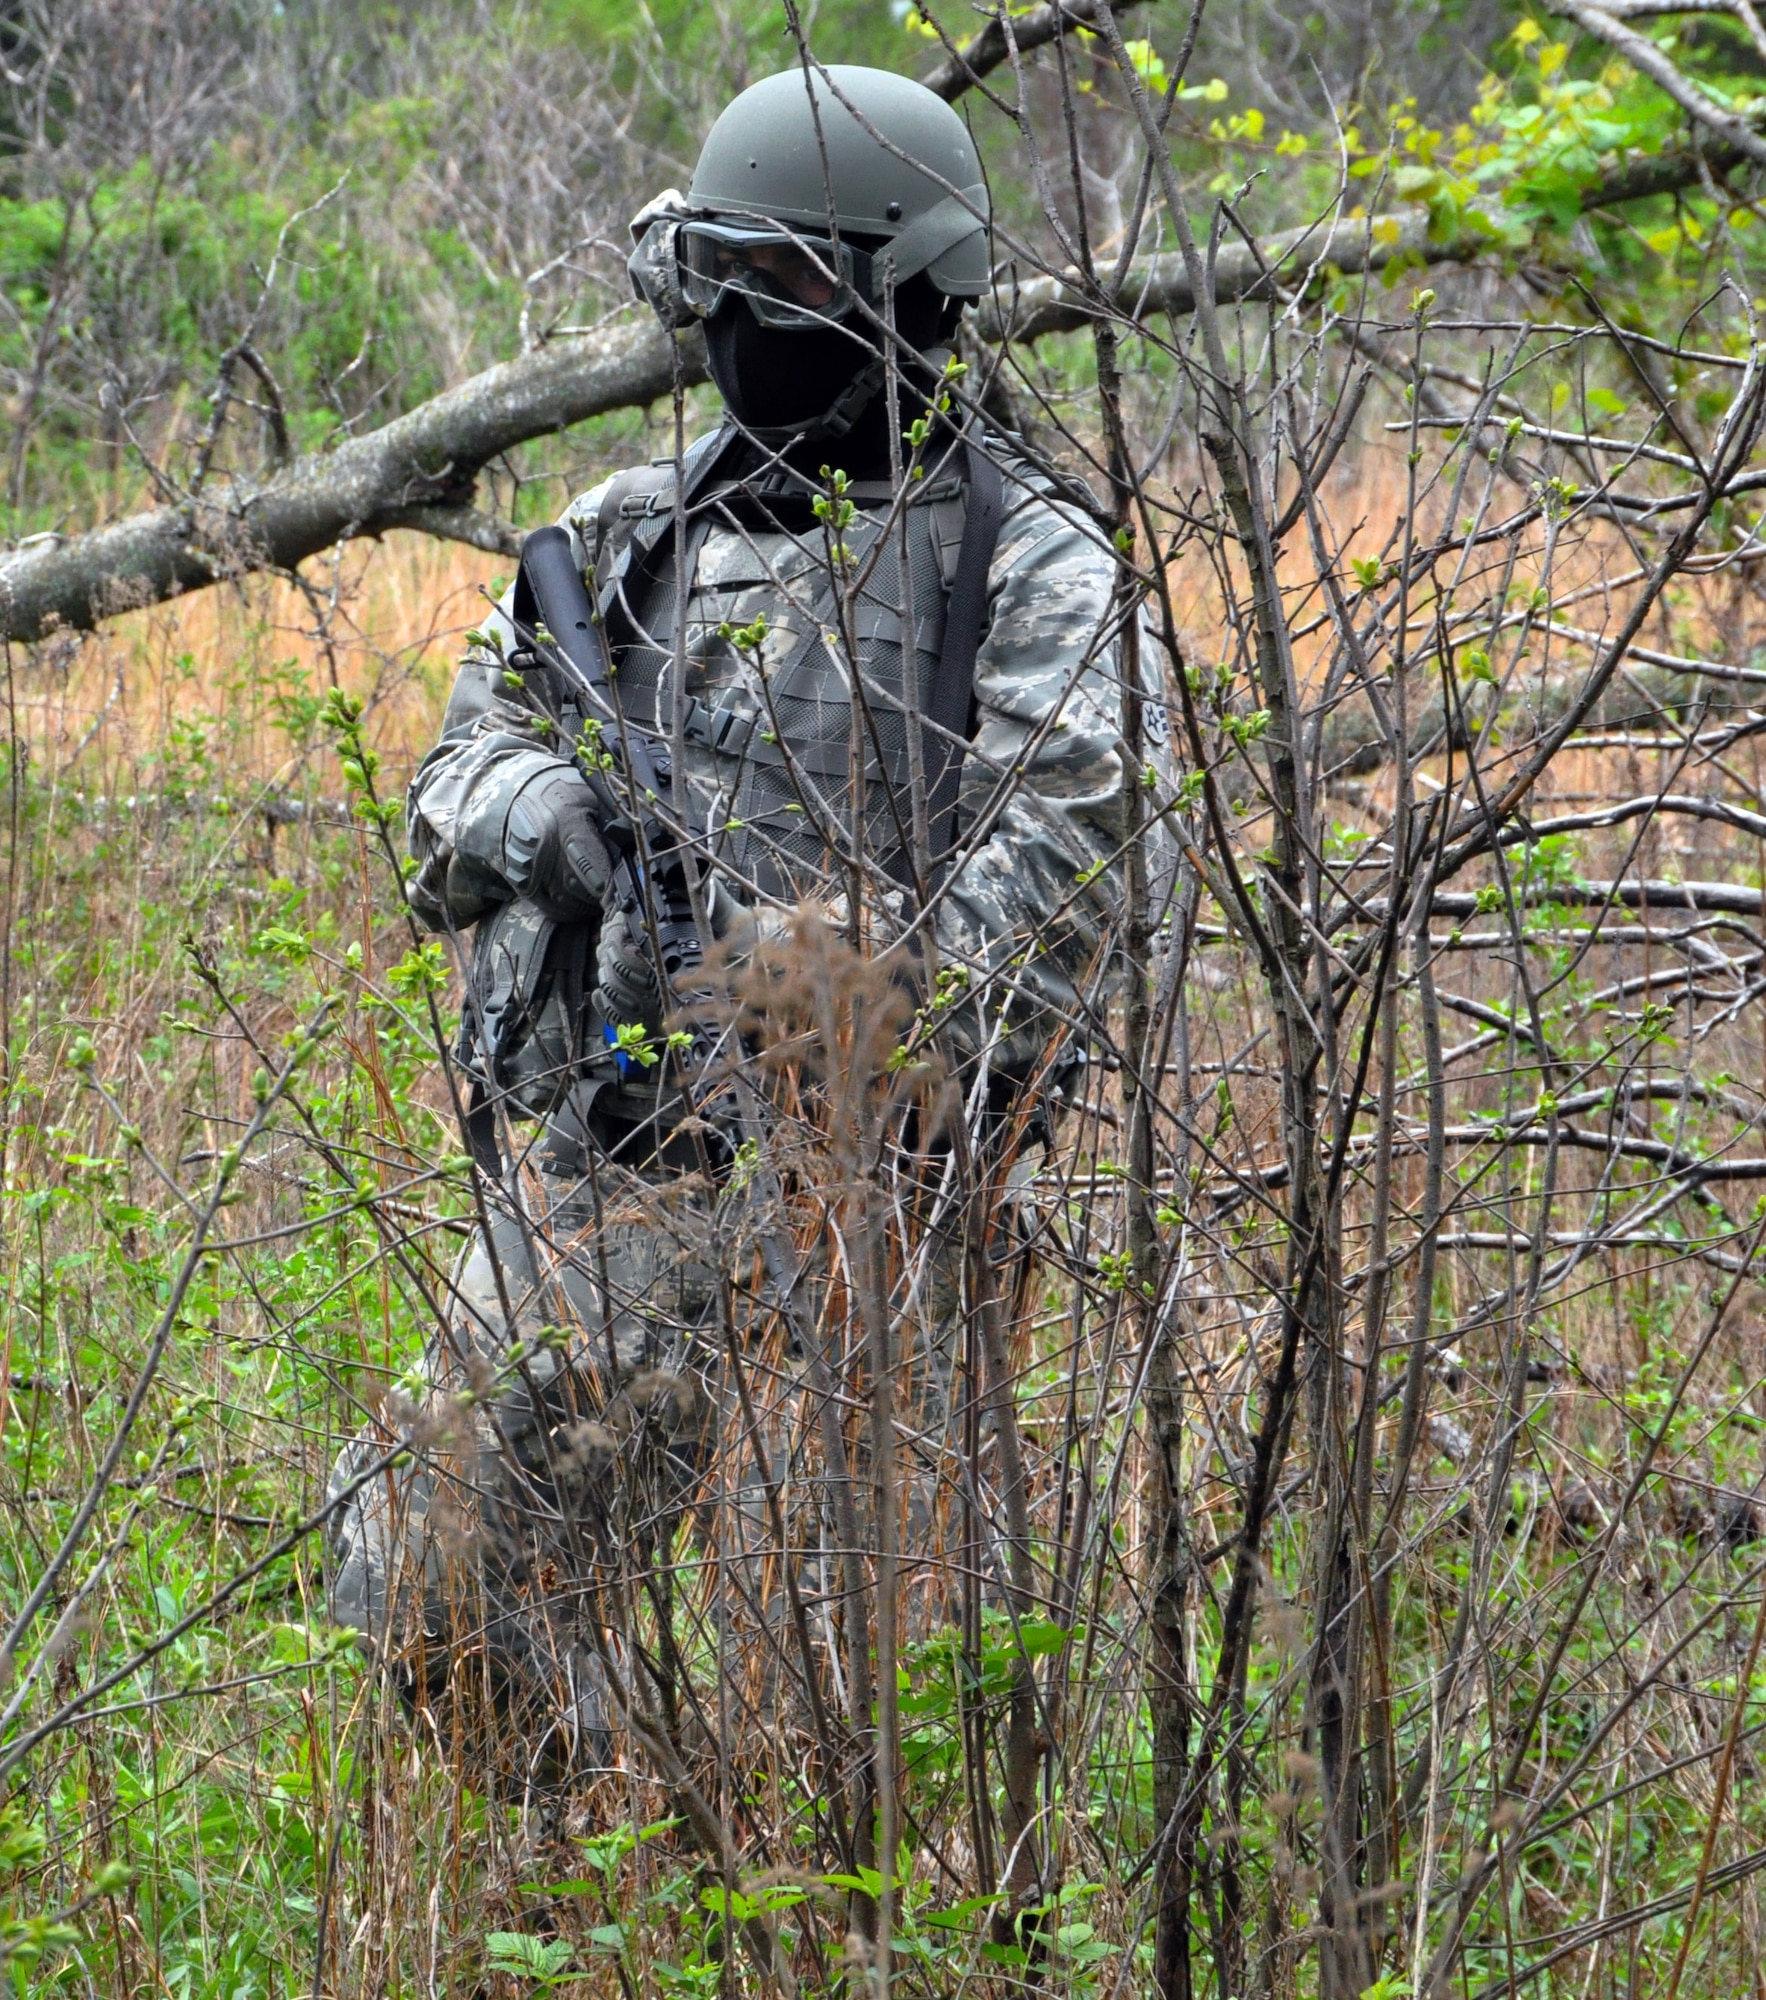 A member of the 931st Security Forces Squadron moves through terrain during a foot patrol training exercise at Camp Gruber Training Center, Okla., April 15, 2015.  More than 80 members of the 931 SFS and 931st Civil Engineer Squadron participated in ten days of combat skills training at Camp Gruber, which included land navigation, weapons training, tactical movements, convoy operations, base defense, room clearing procedures, foot patrols, military operations on urban terrain (MOUT) and combat lifesaving.  (U.S. Air Force photo by Capt. Zach Anderson)
